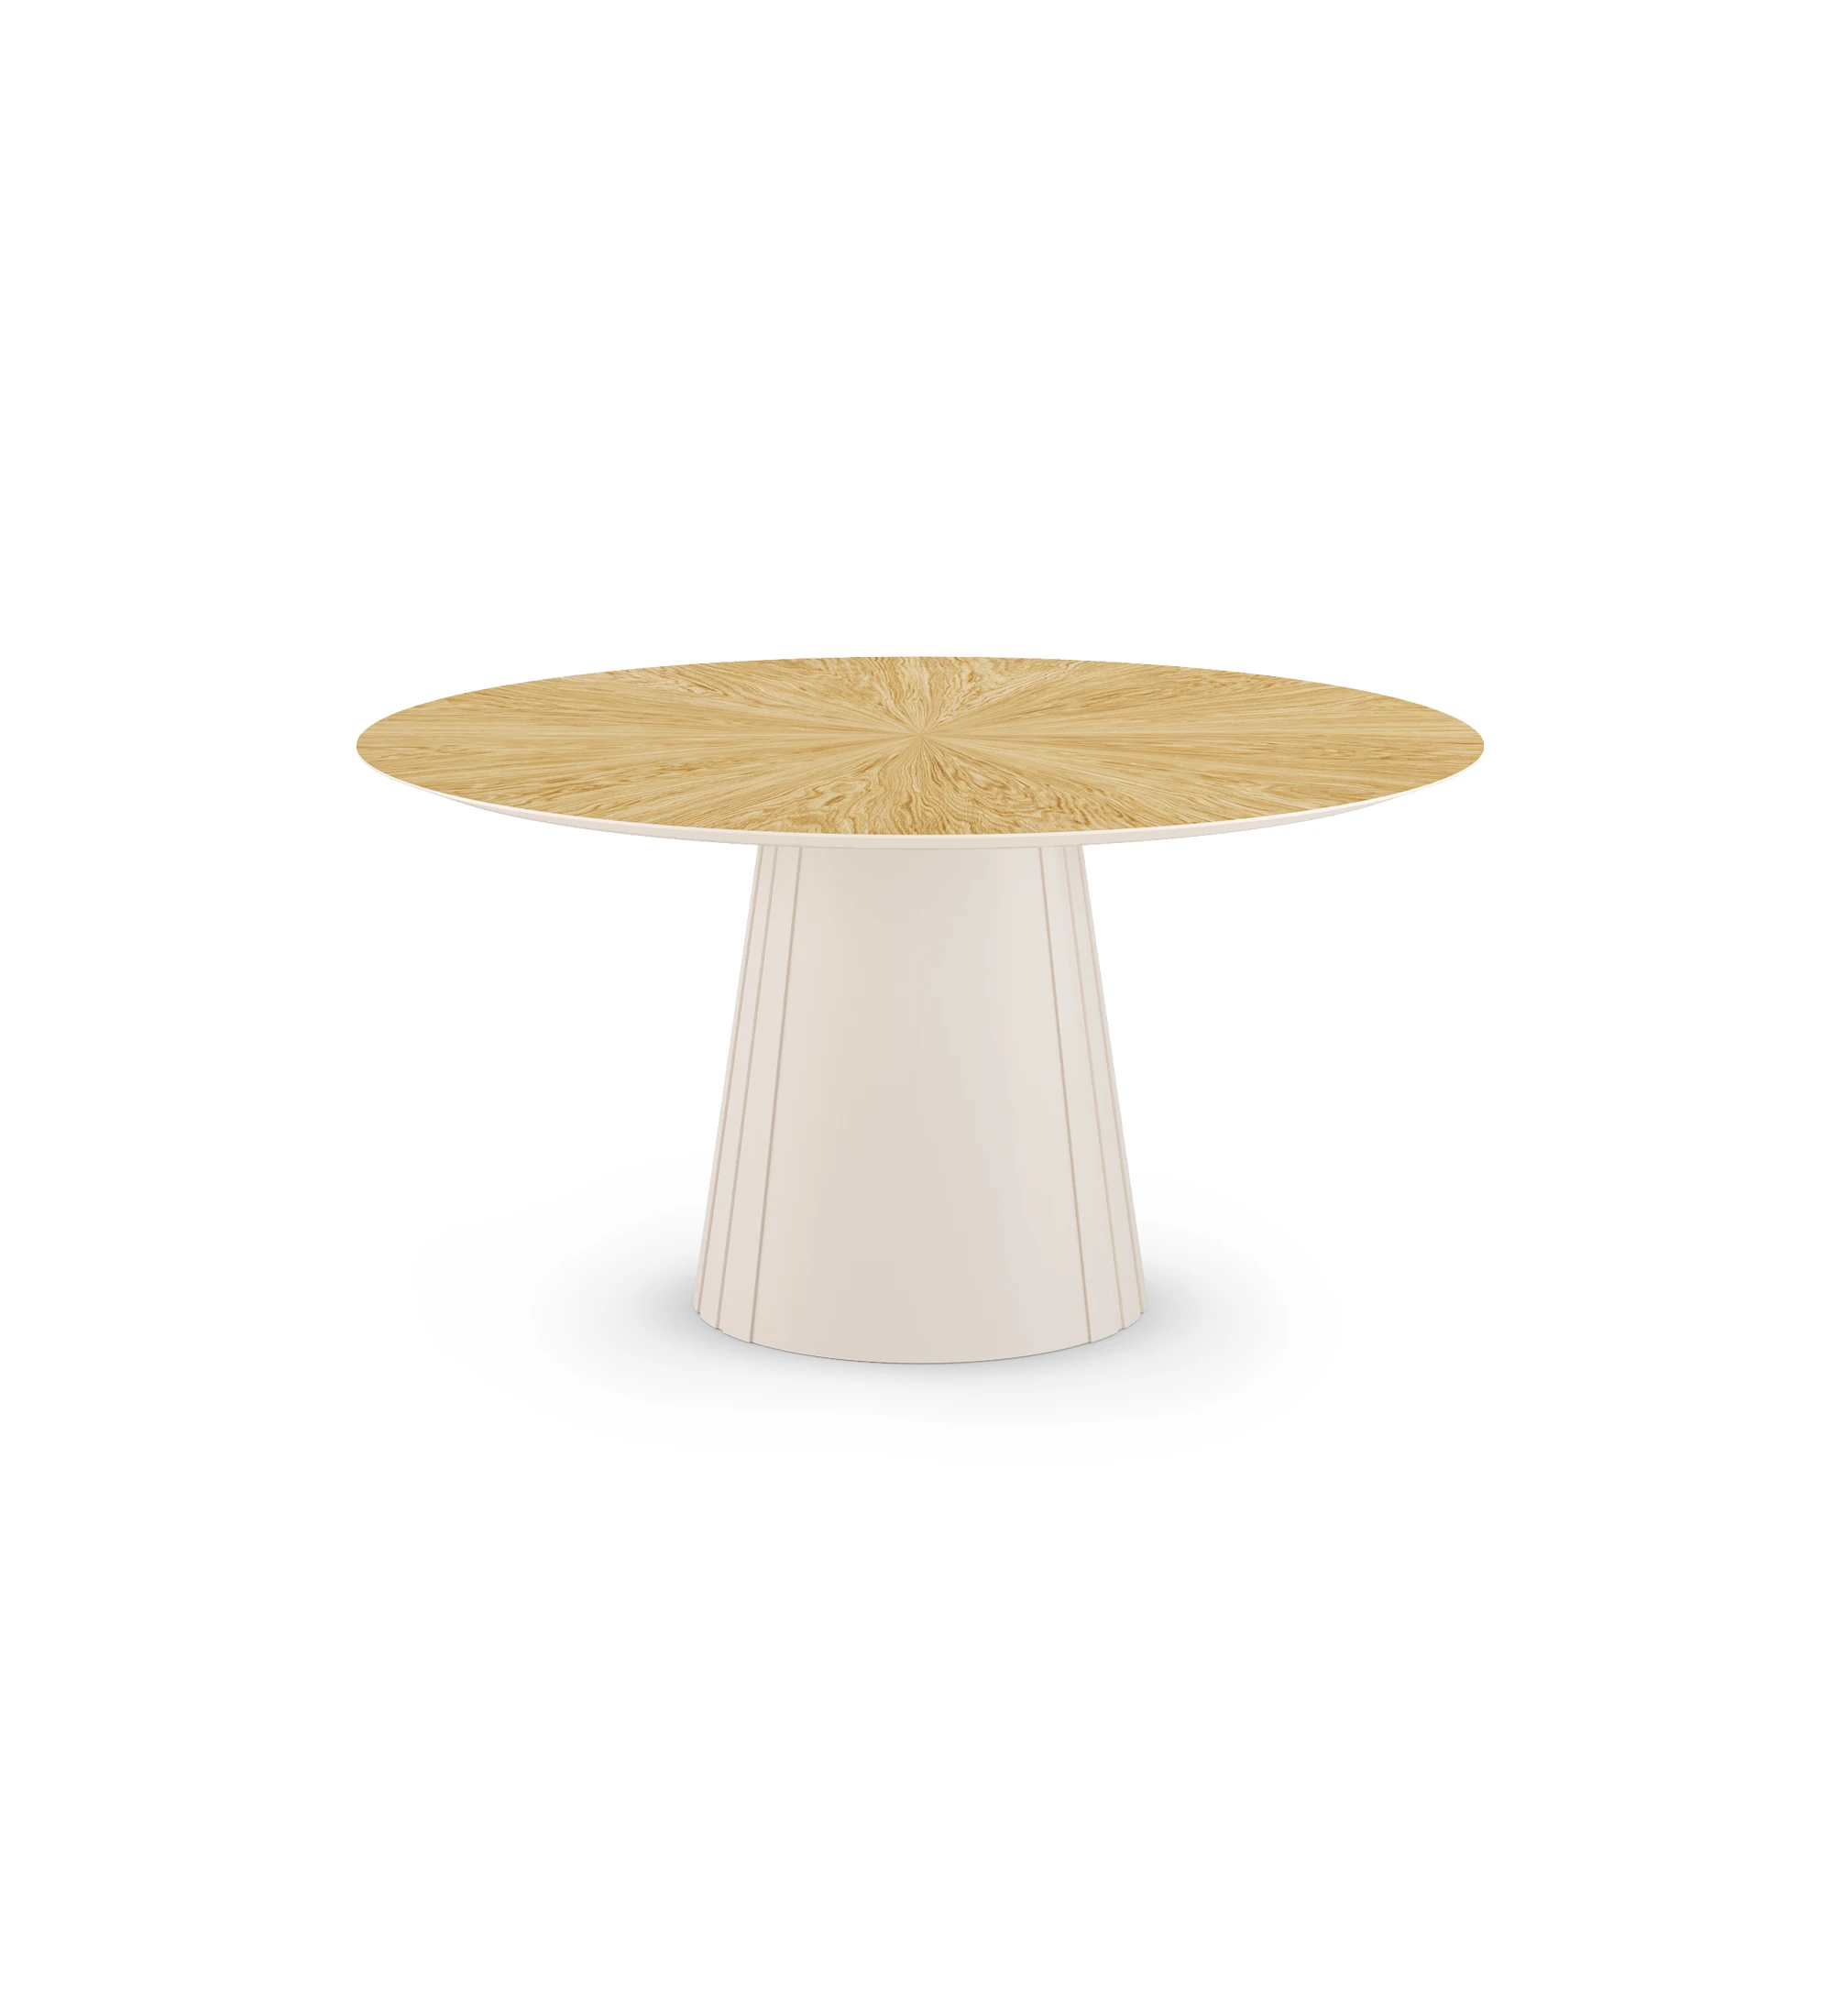 Cannes round dining table Ø 150 cm, natural oak top, pearl lacquered foot.